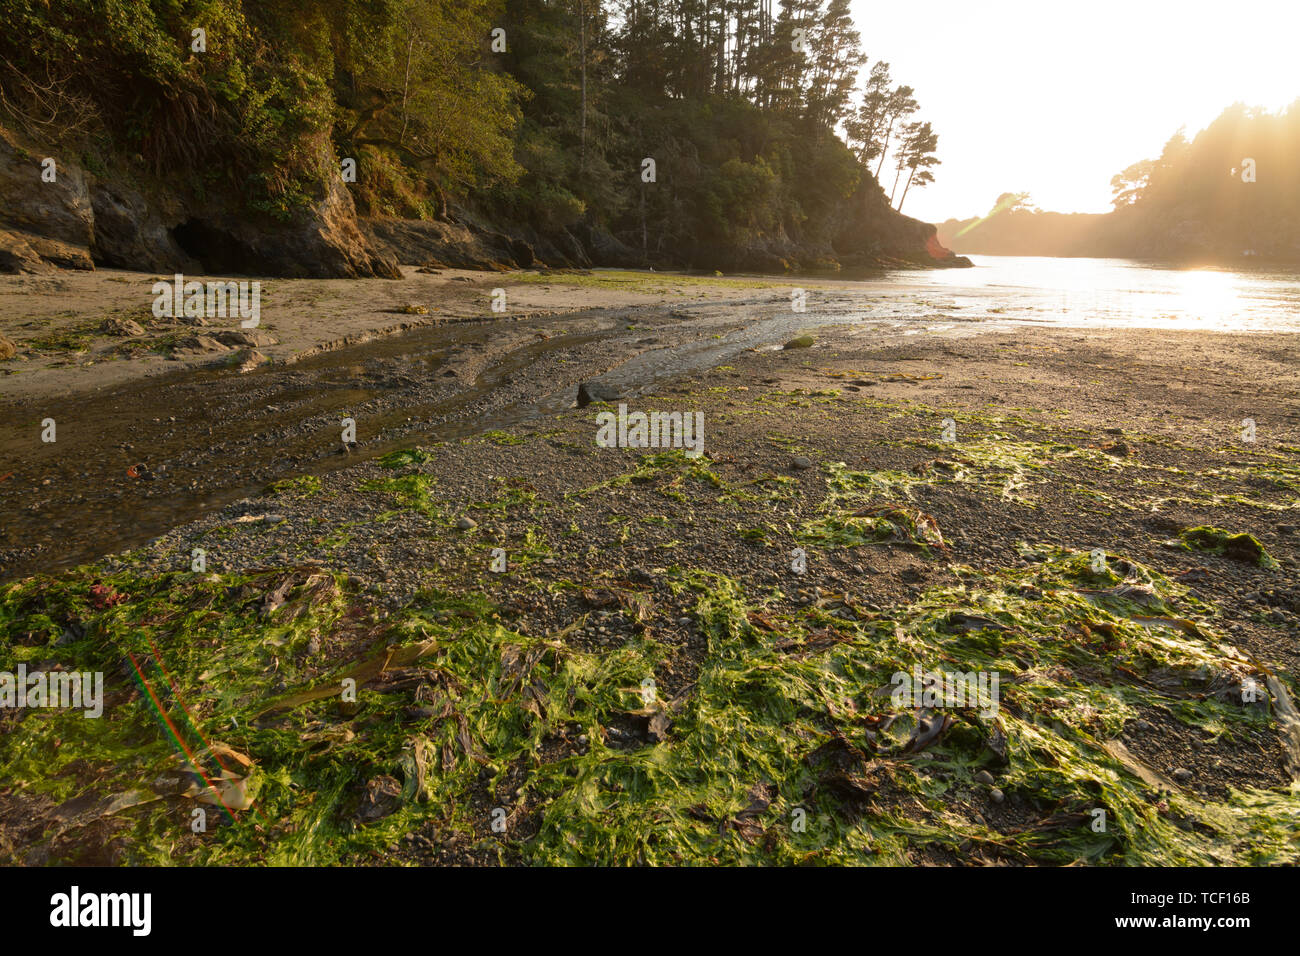 pile up of sea weed at low tide at a beach near mendocino california Stock Photo